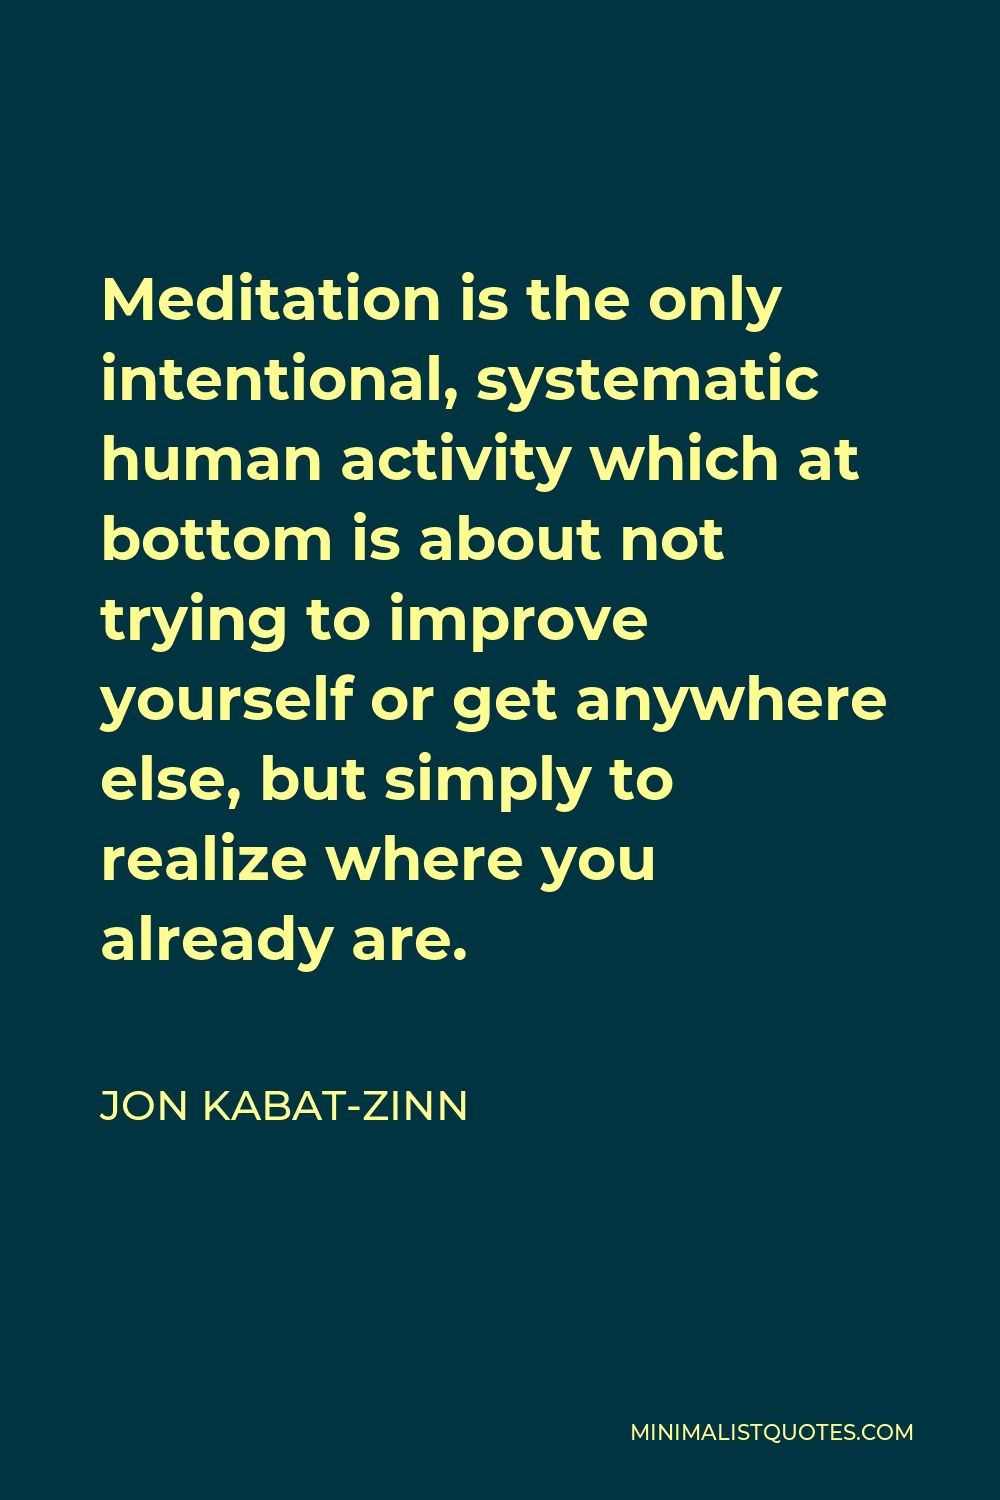 Jon Kabat-Zinn Quote - Meditation is the only intentional, systematic human activity which at bottom is about not trying to improve yourself or get anywhere else, but simply to realize where you already are.